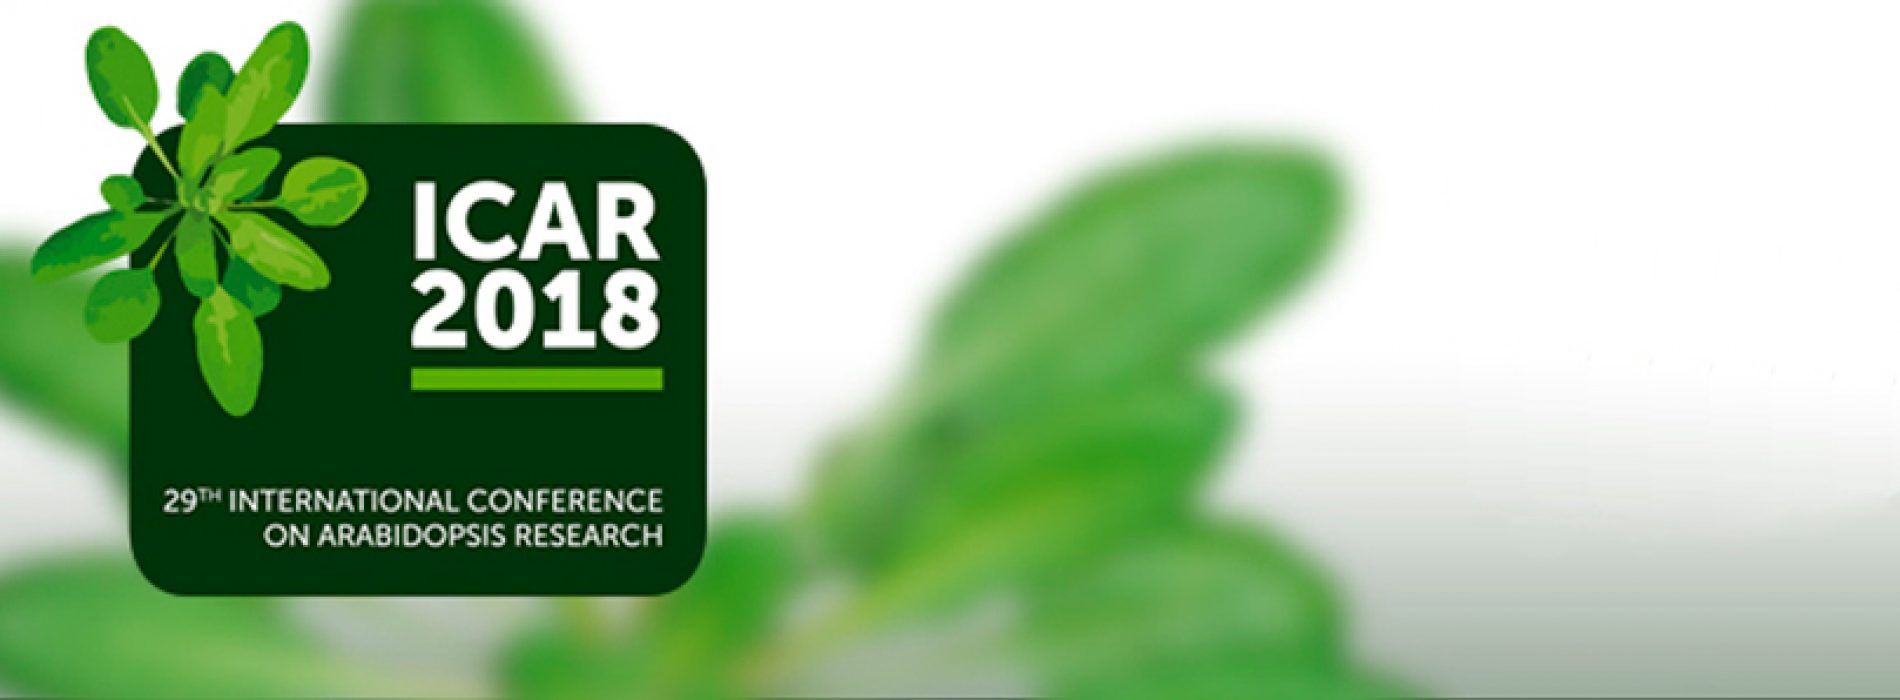 International Conference on Arabidopsis Research ICAR 2018